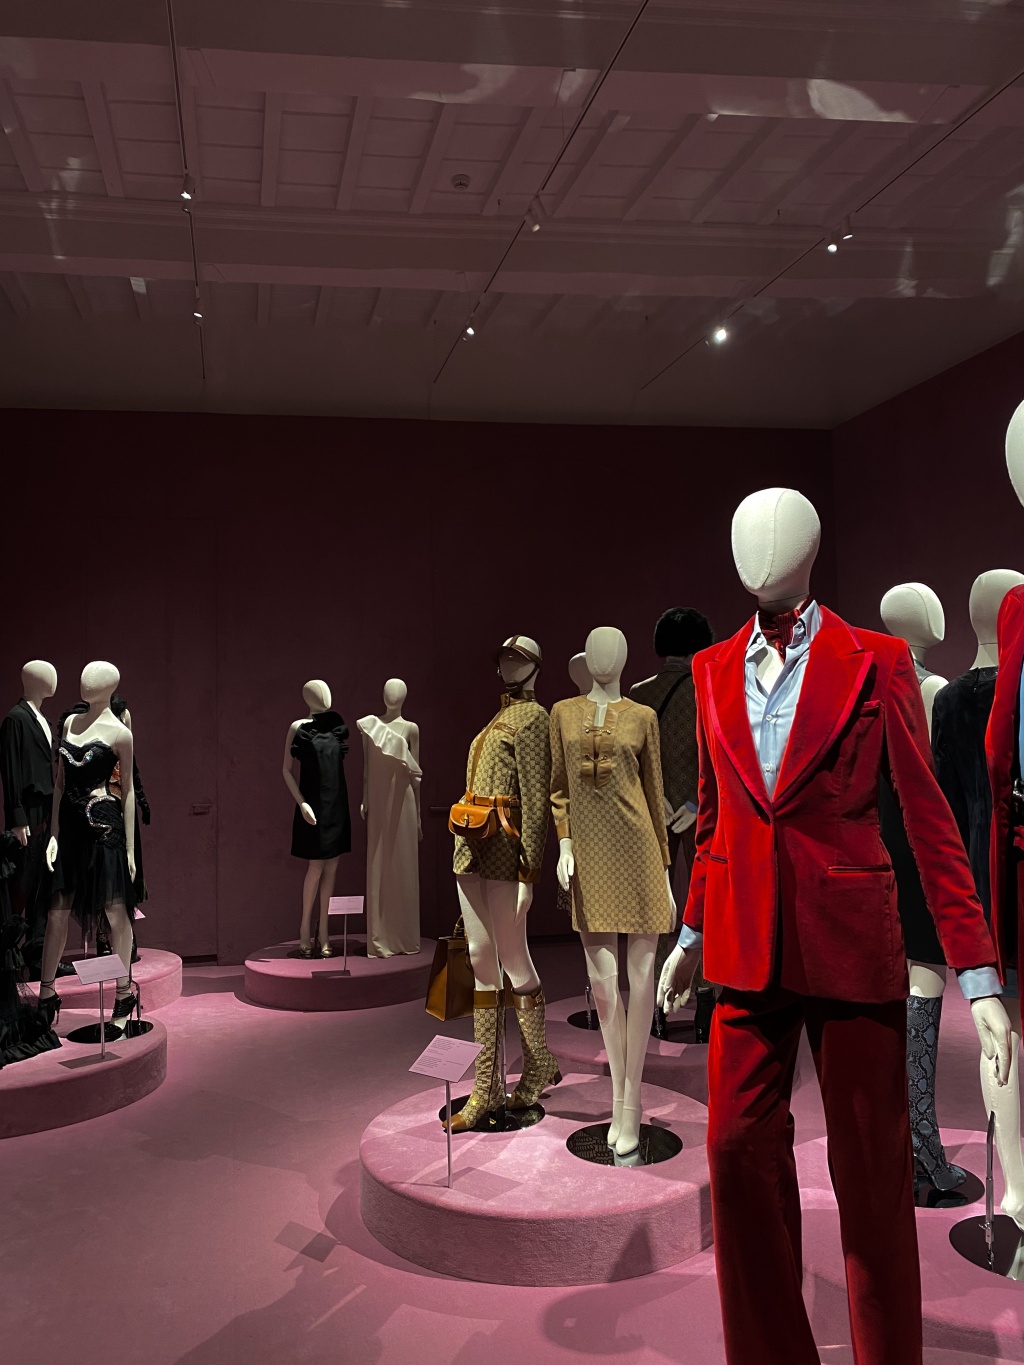 Gucci Garden in Florence: Home of the Iconic Italian Fashion House